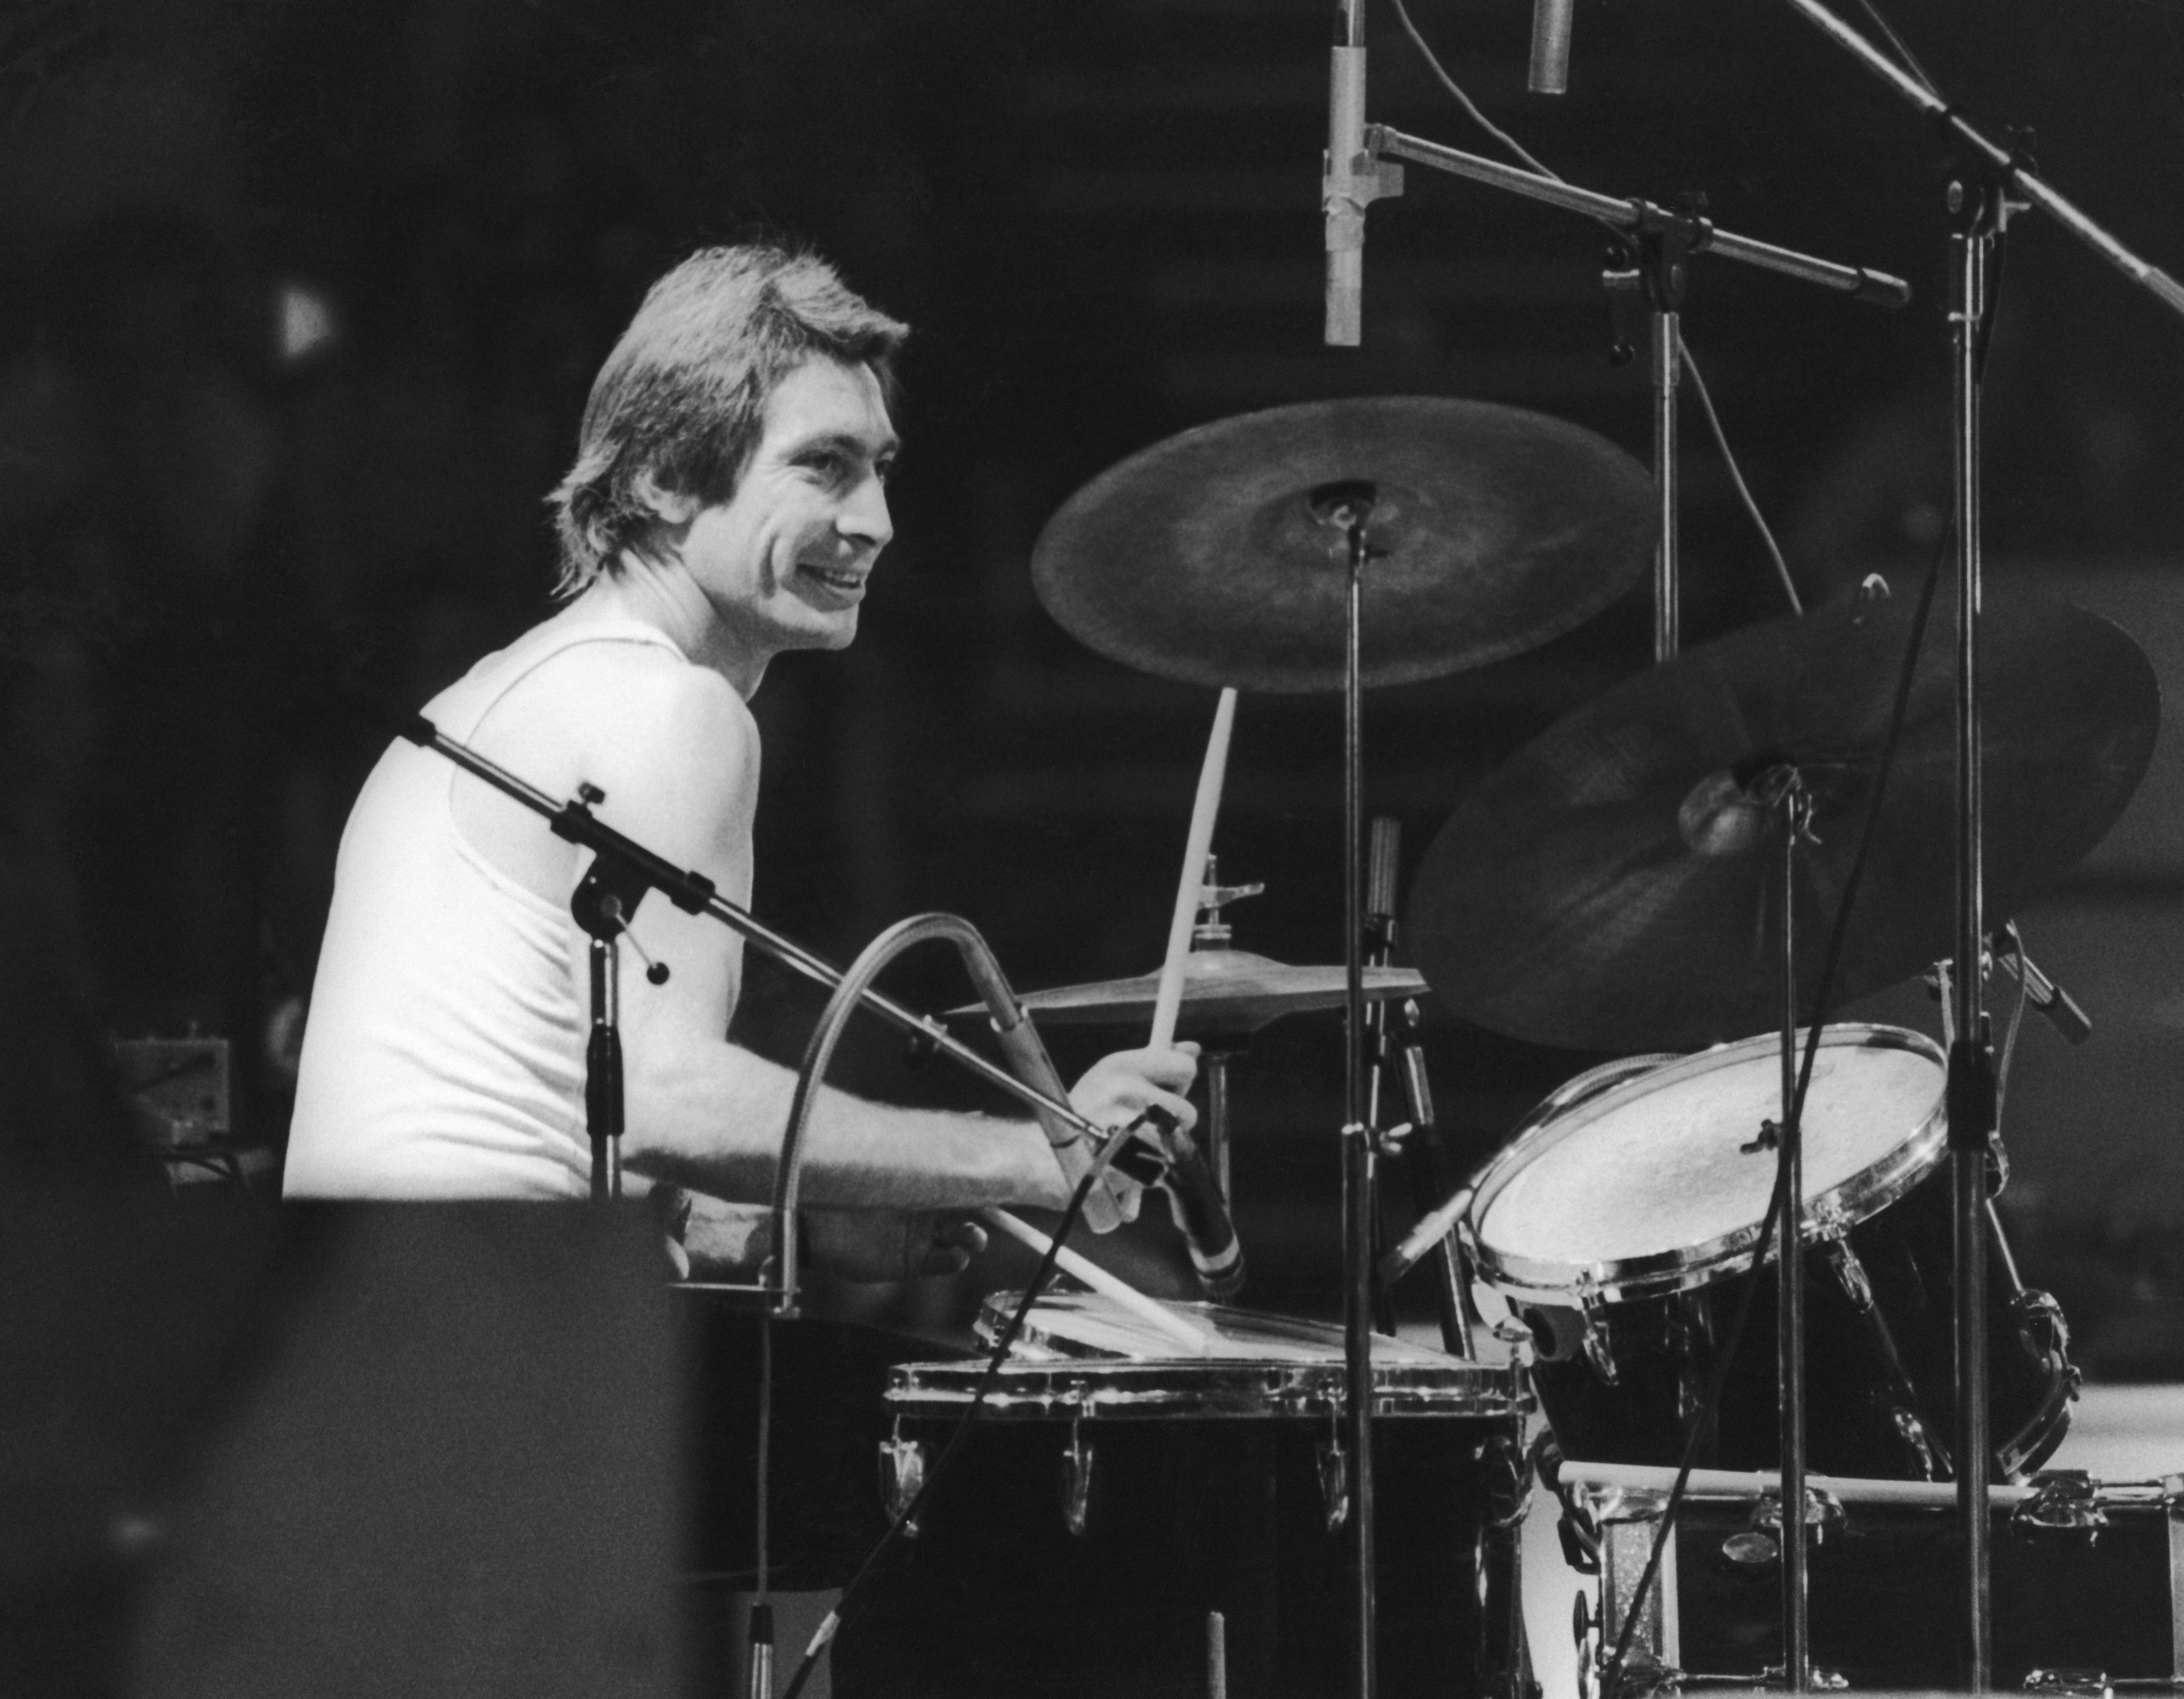 Drummer Charlie Watts of the Rolling Stones, at a British concert and sporting a new David Bowie style feather cut in 1973.